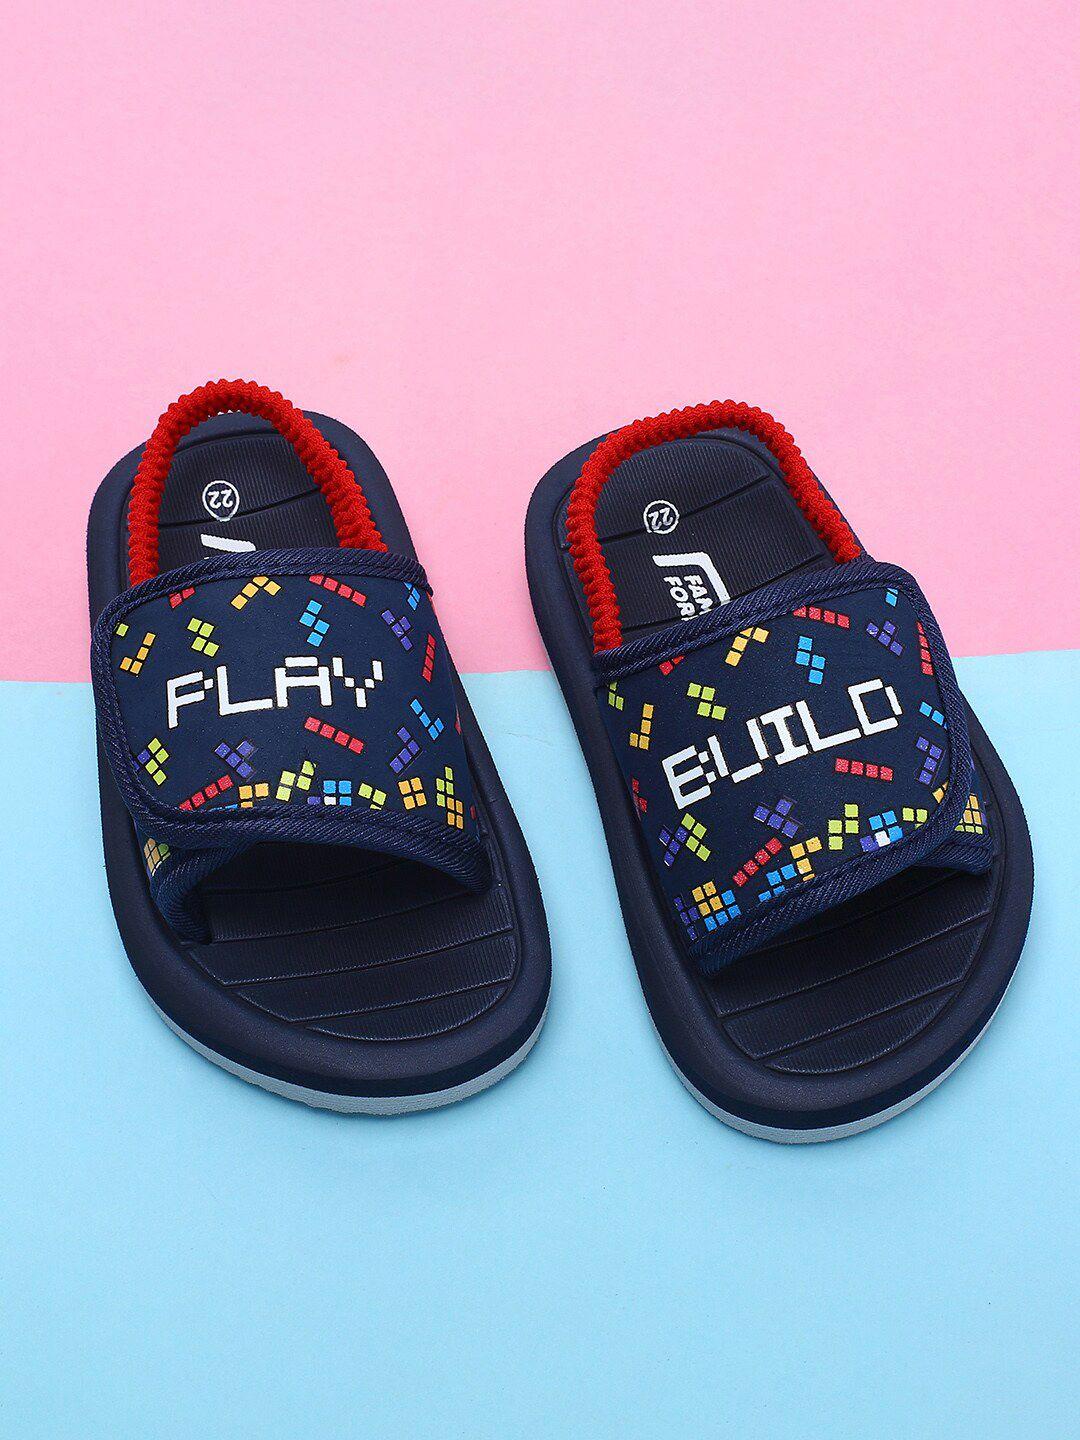 fame forever by lifestyle boys navy blue & red printed synthetic sliders flip flops